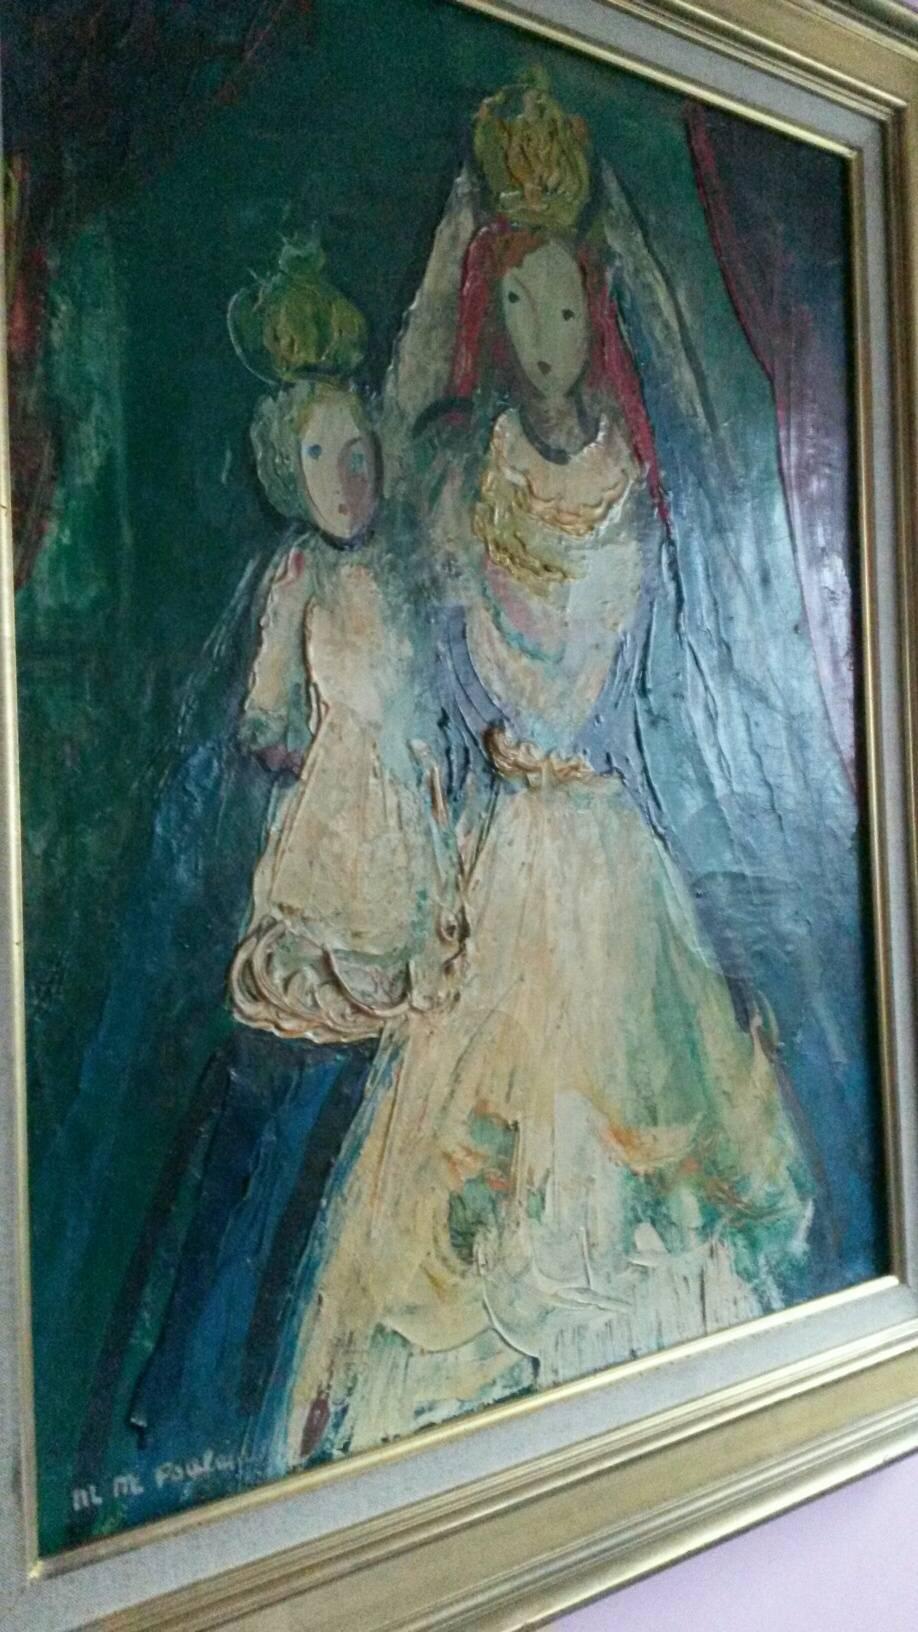 By French famous Transgender artist,  Michel Marie Poulain (Born Paris December 5, 1906. Died  1991) this rare oil on canvas   it represents the Queen and her child in a style of some of   Marc Chagall's work.
The painting is in excellent condition,